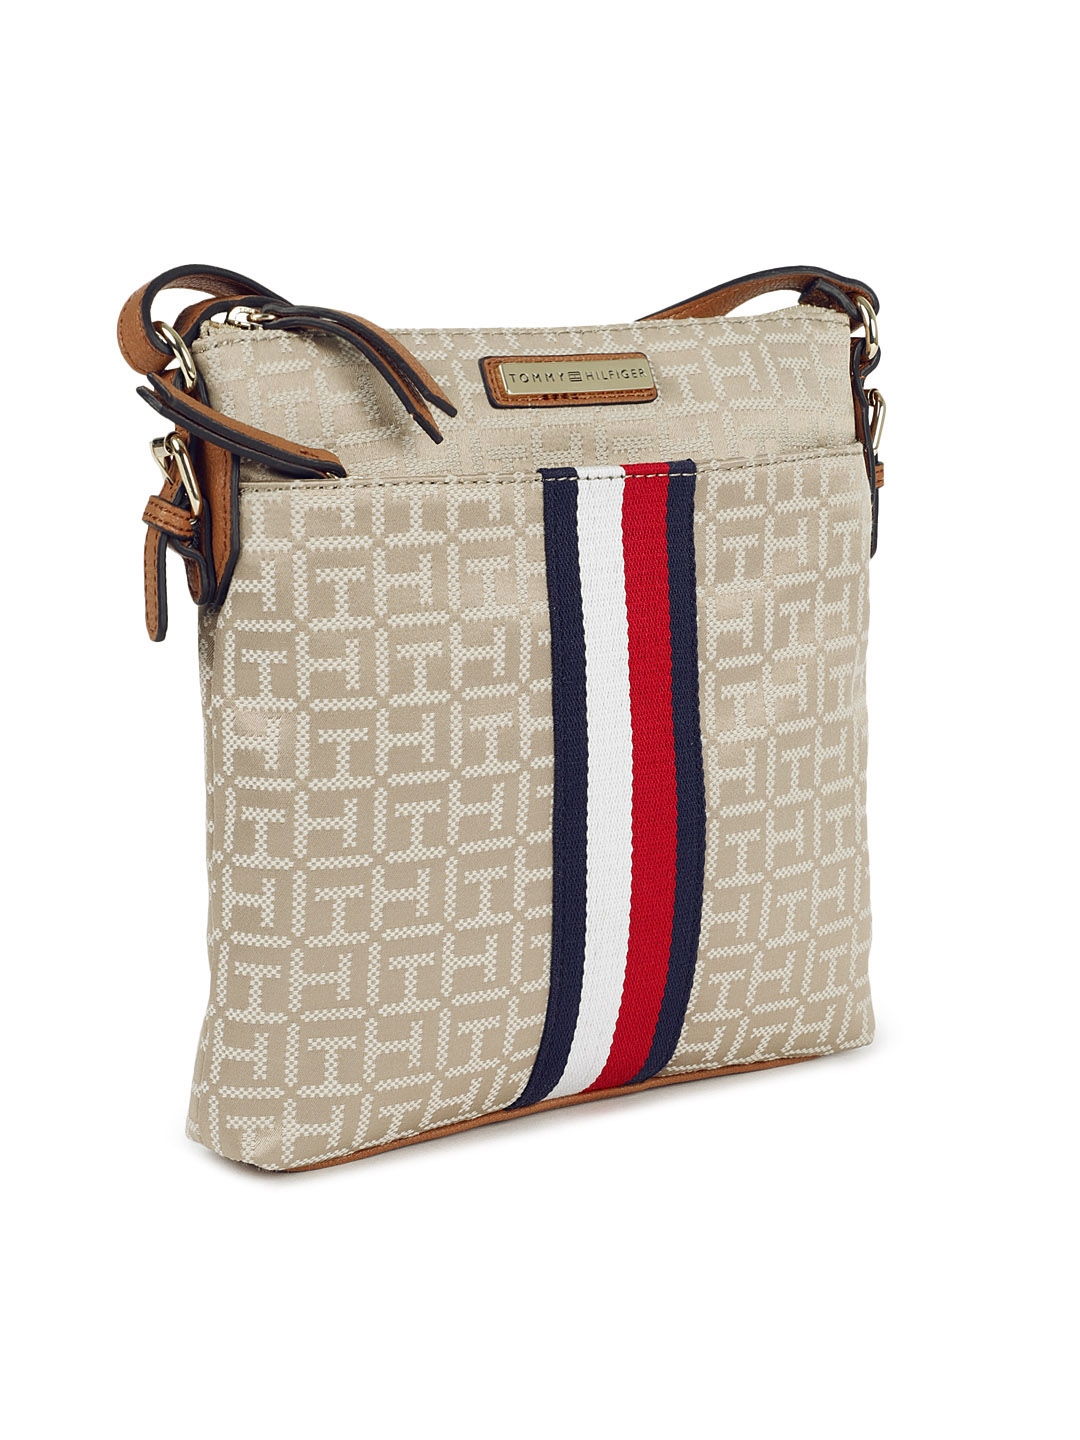 tommy hilfiger handbags clearance india